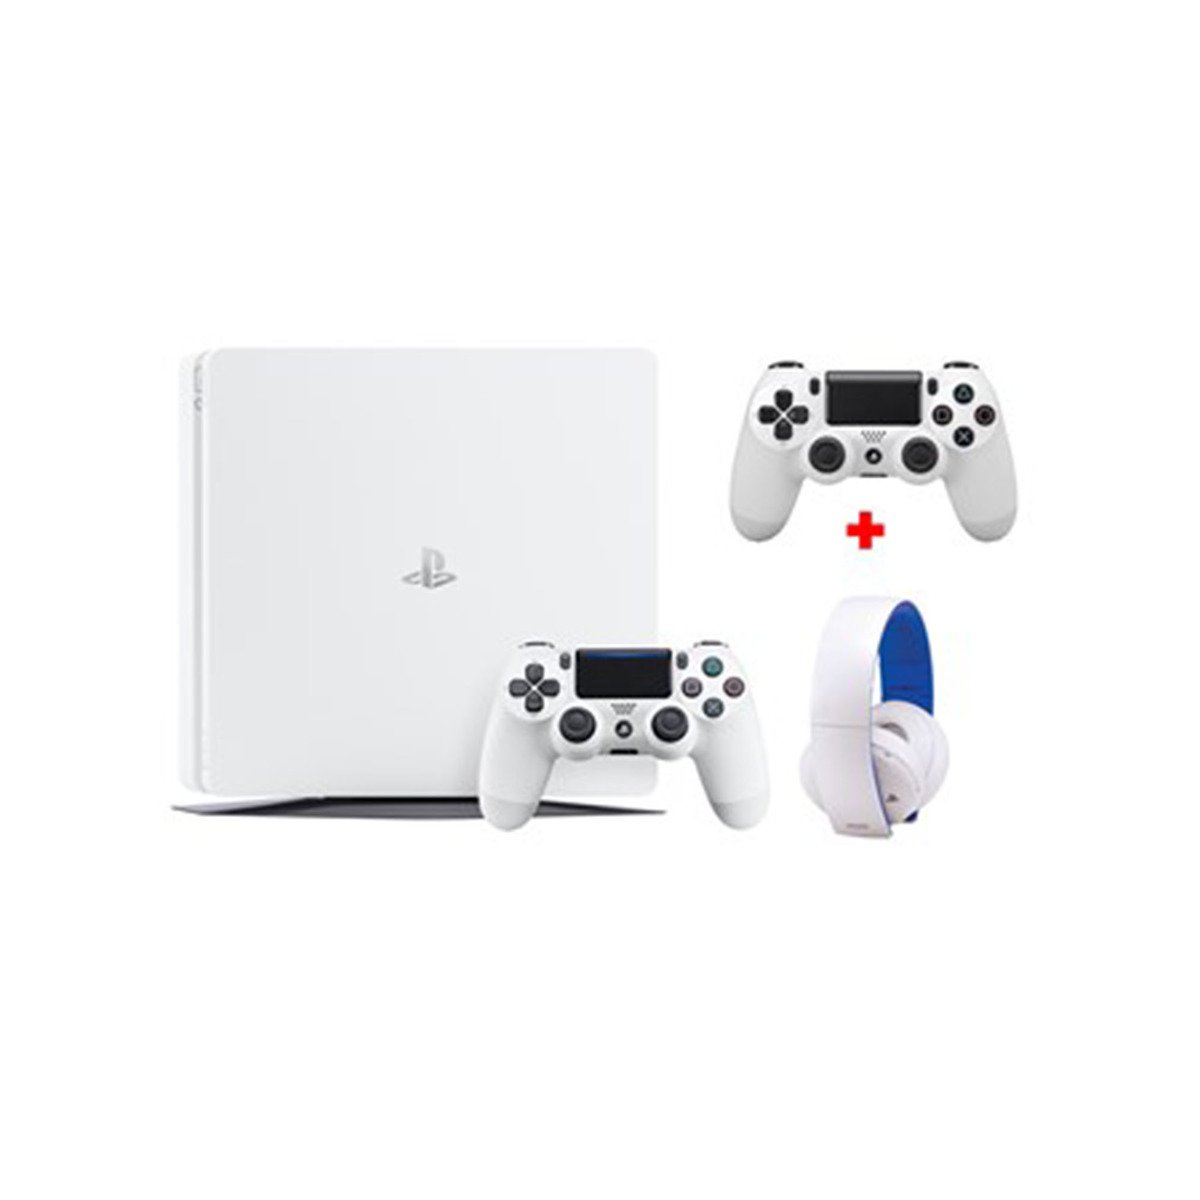 Sony PS4 Slim Console  500GB White + Headset + DS4 White